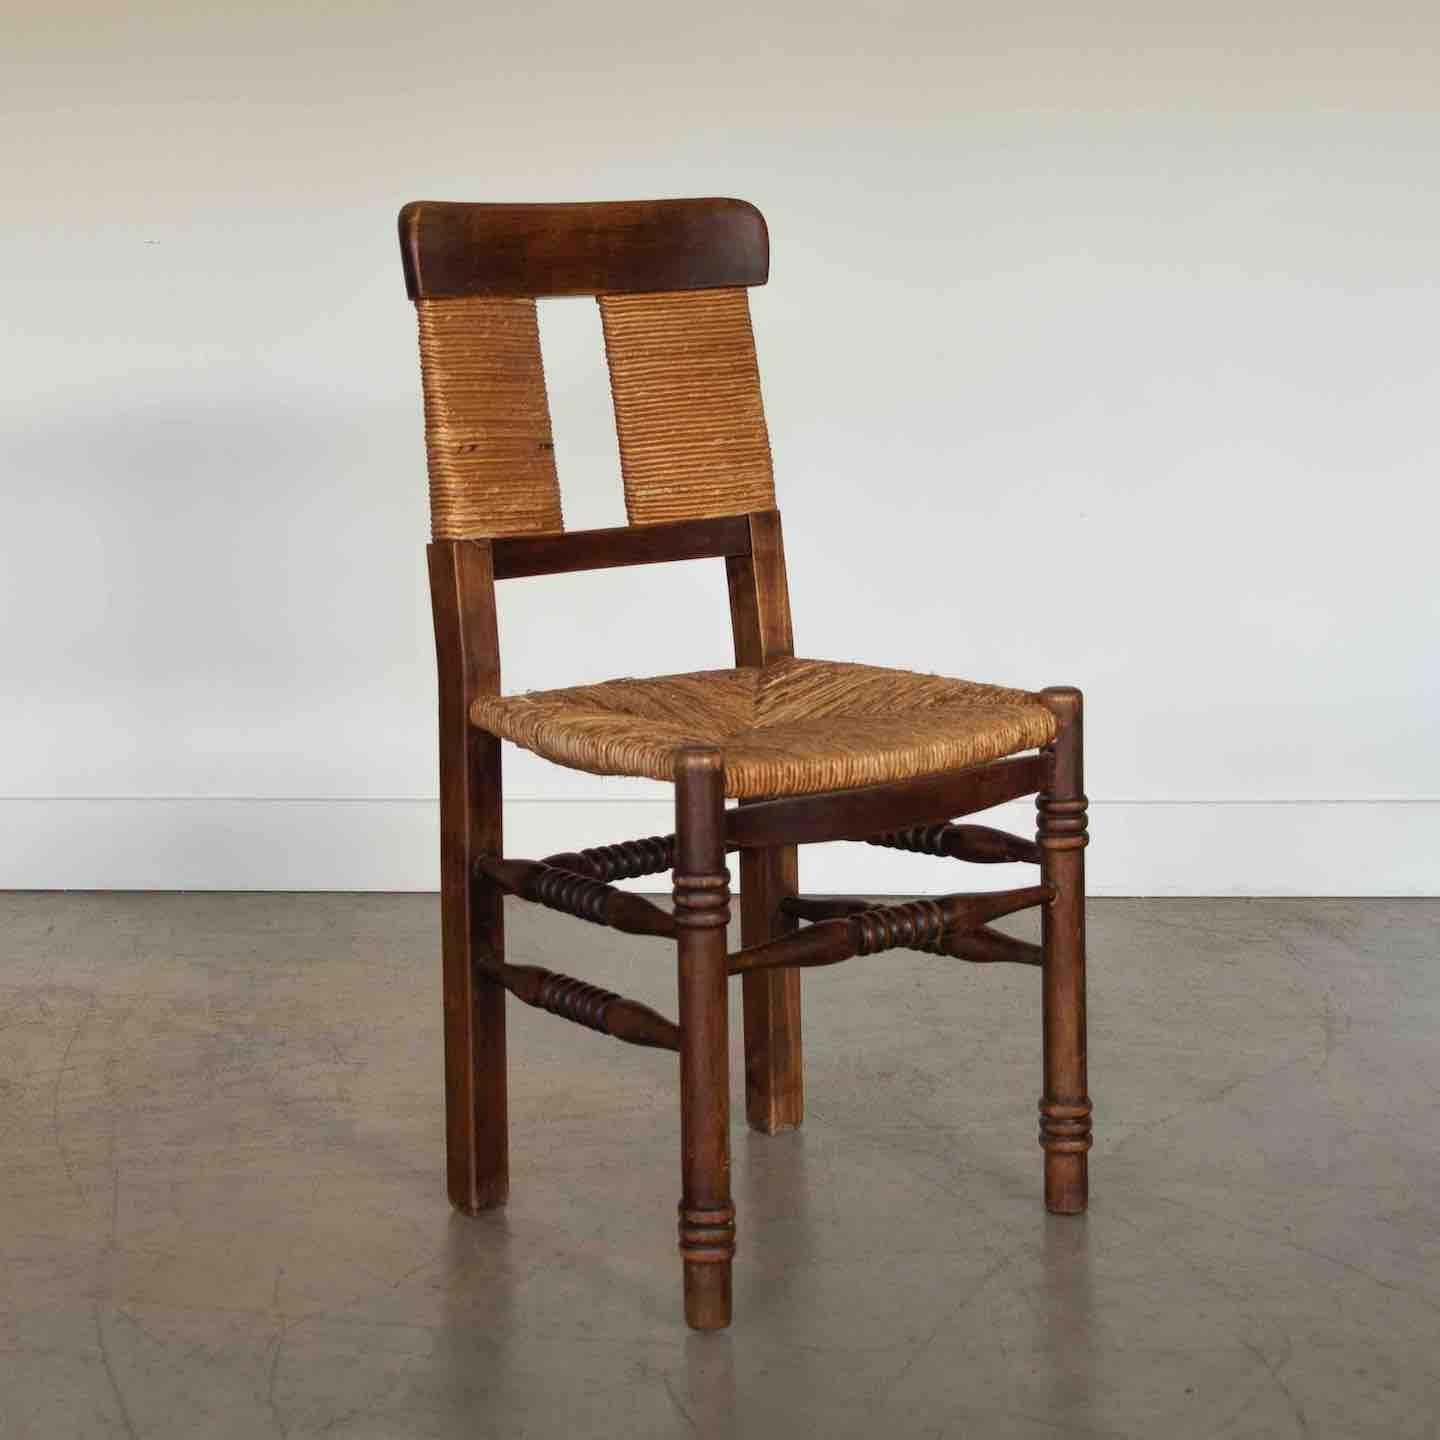 Beautiful carved wood chair from France, 1940s. Original woven rush back and seat. Intricate carved wood detail on legs and wood frame with medium stain. Original finish shows great age and patina. Perfect as a desk or side chair. 